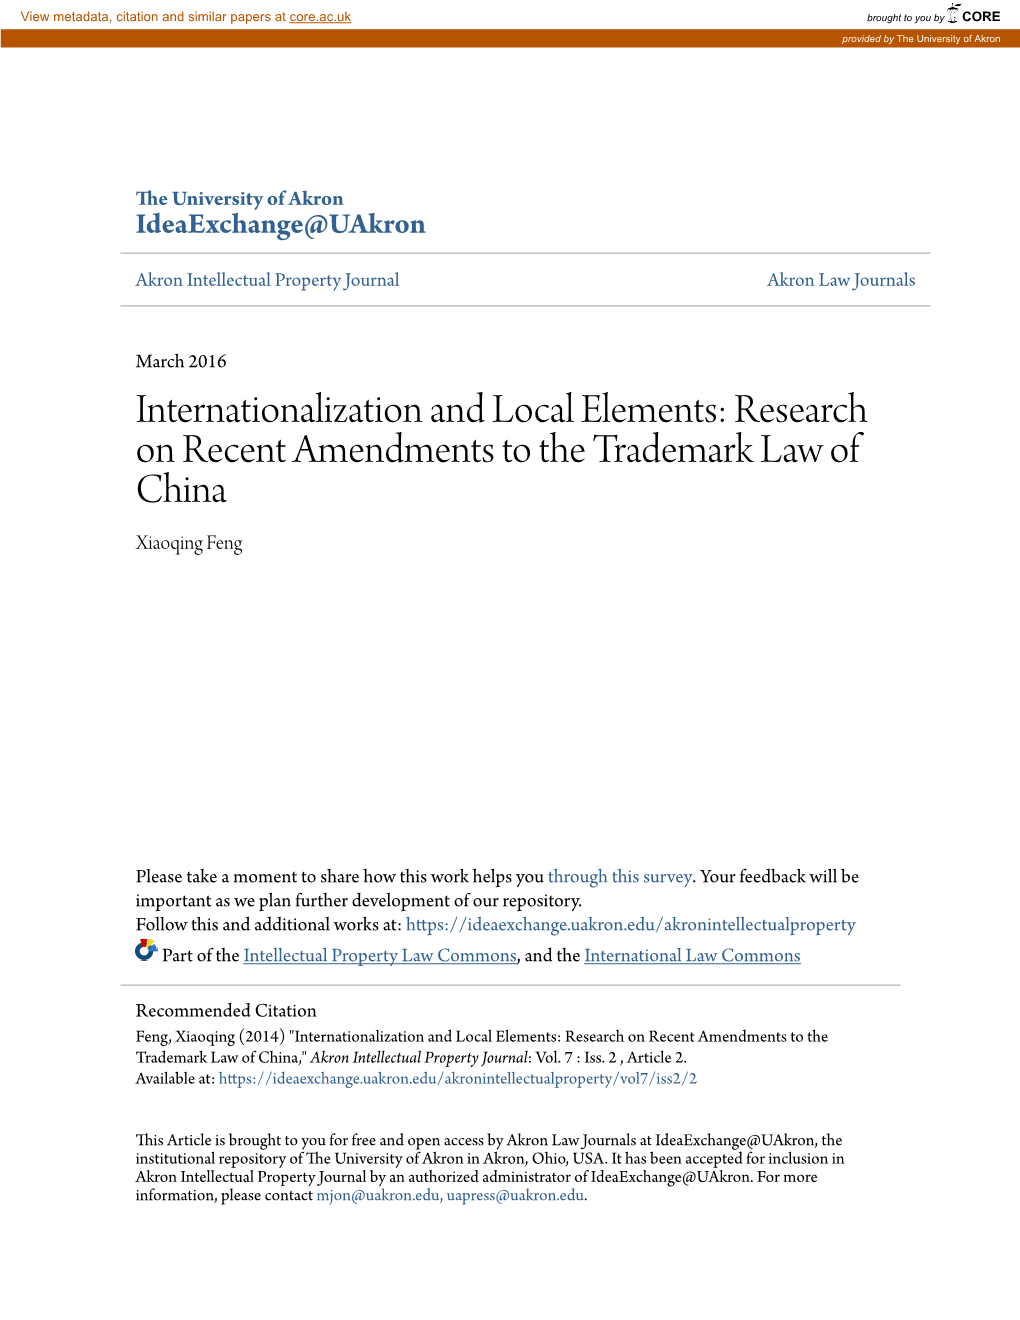 Research on Recent Amendments to the Trademark Law of China Xiaoqing Feng